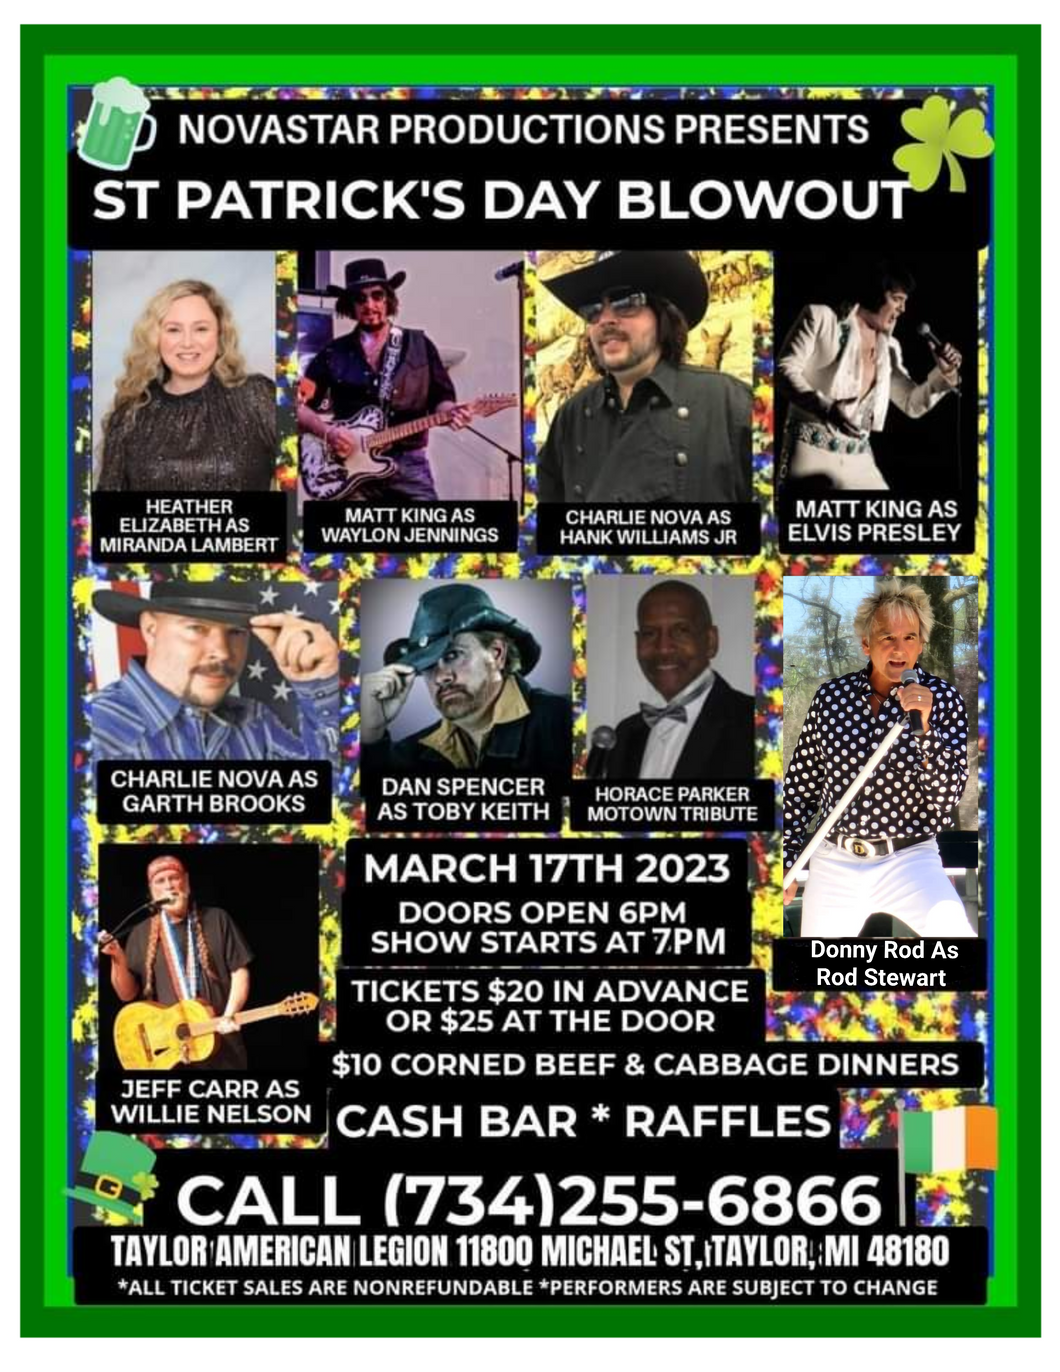 St.patricks day blow out show